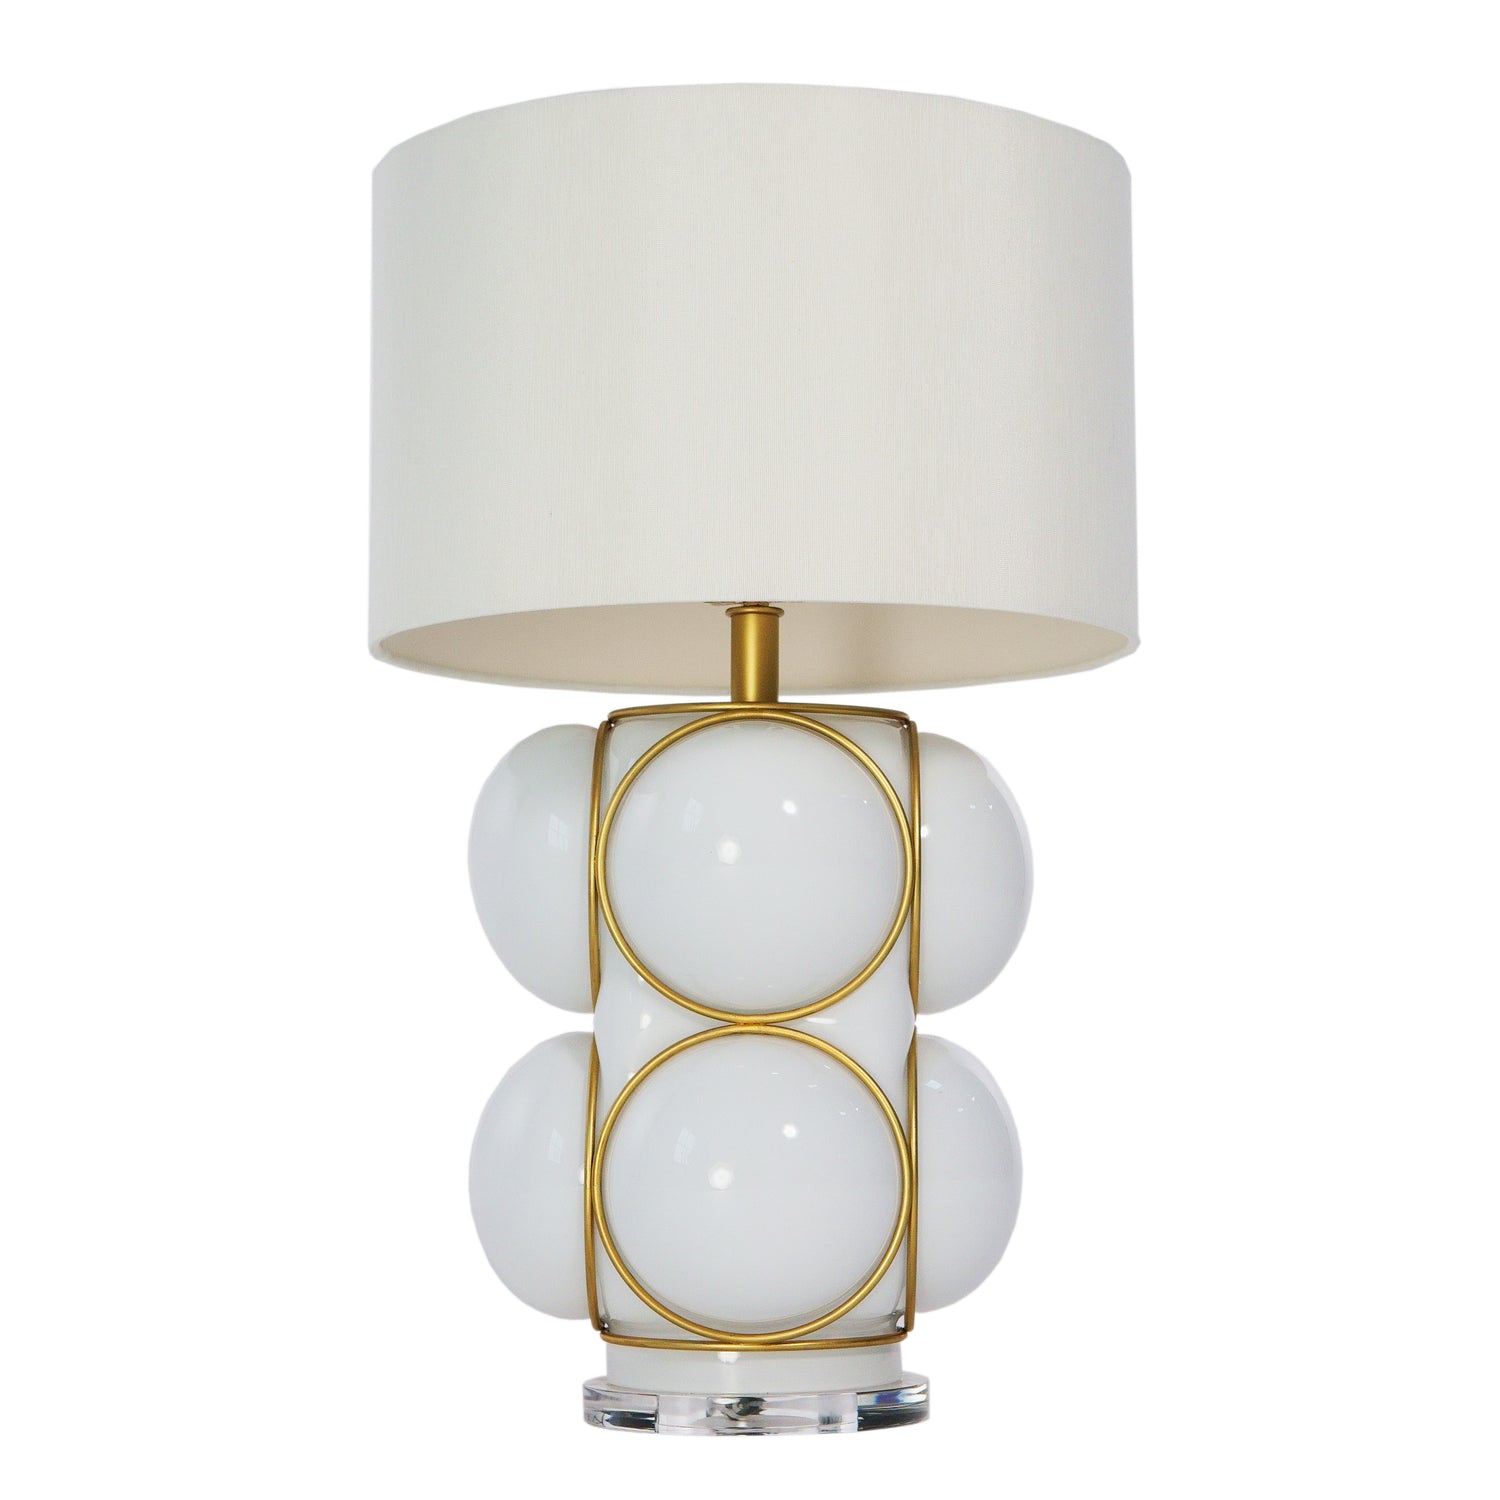 Add a touch of fun with this bubble effect lamp in white/bronze